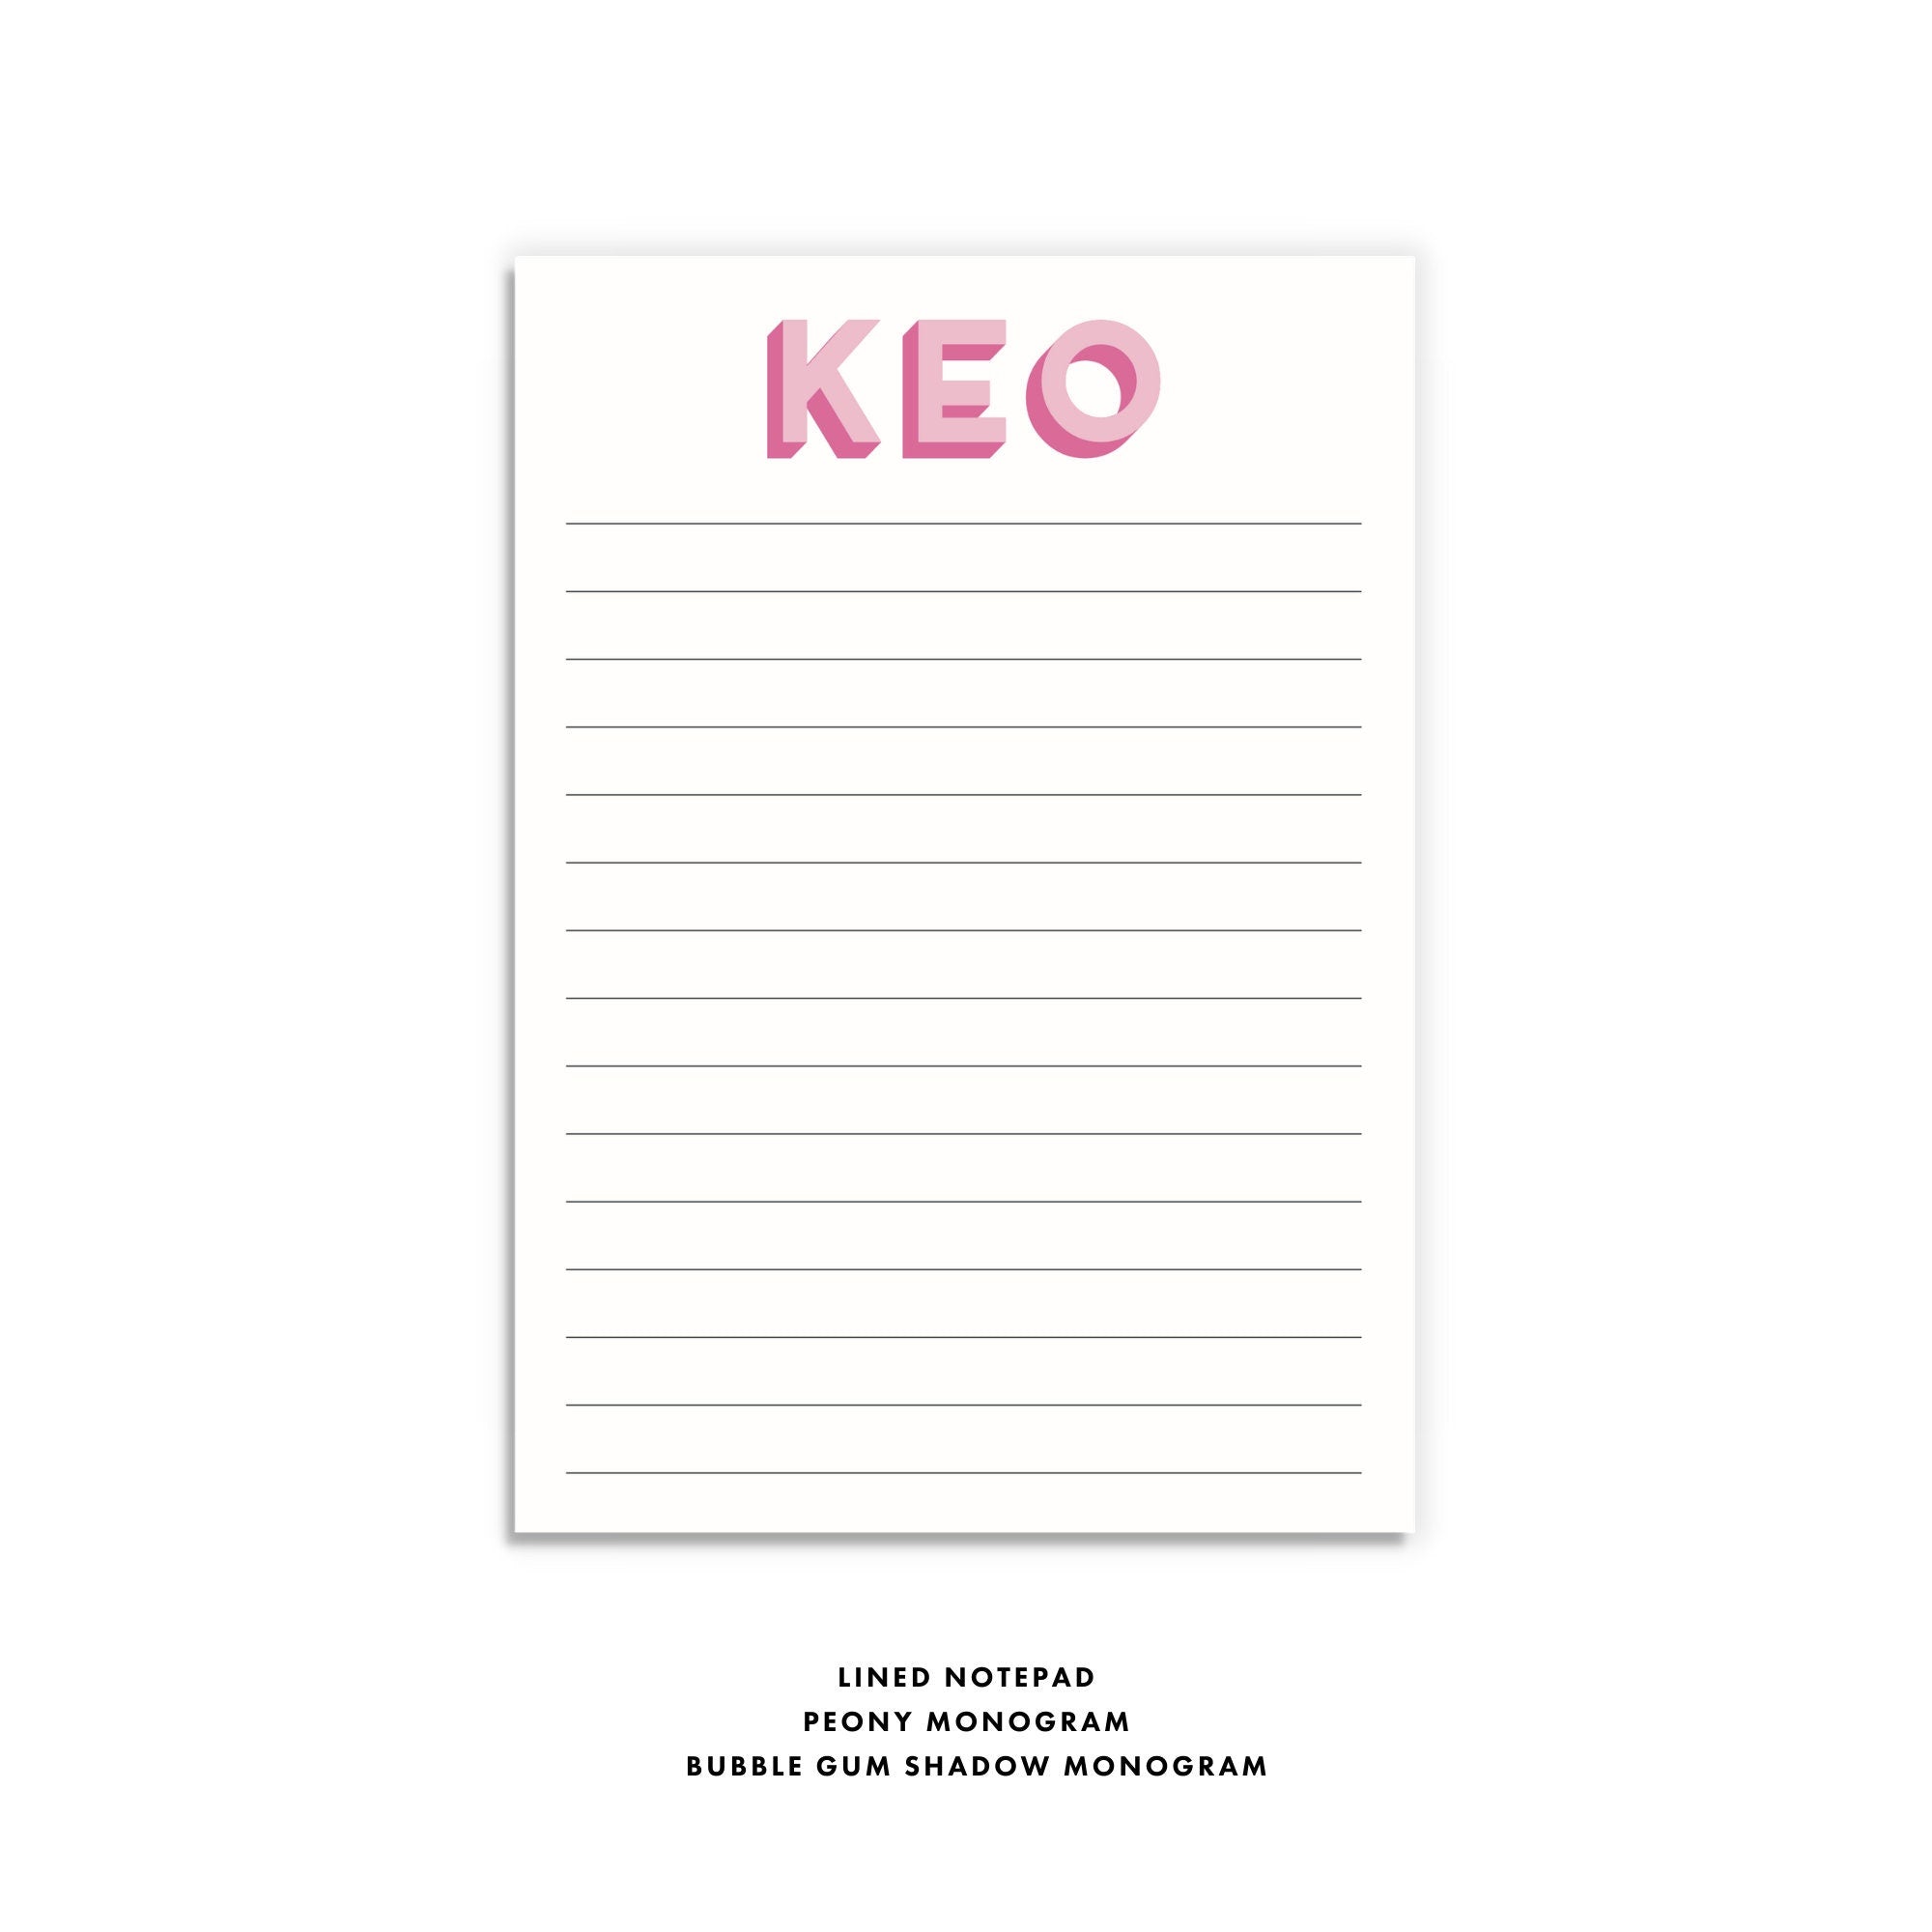 personalized notepad monogram notepad custom notepad personalized stationery teacher gift grad gift to do list family prep planning